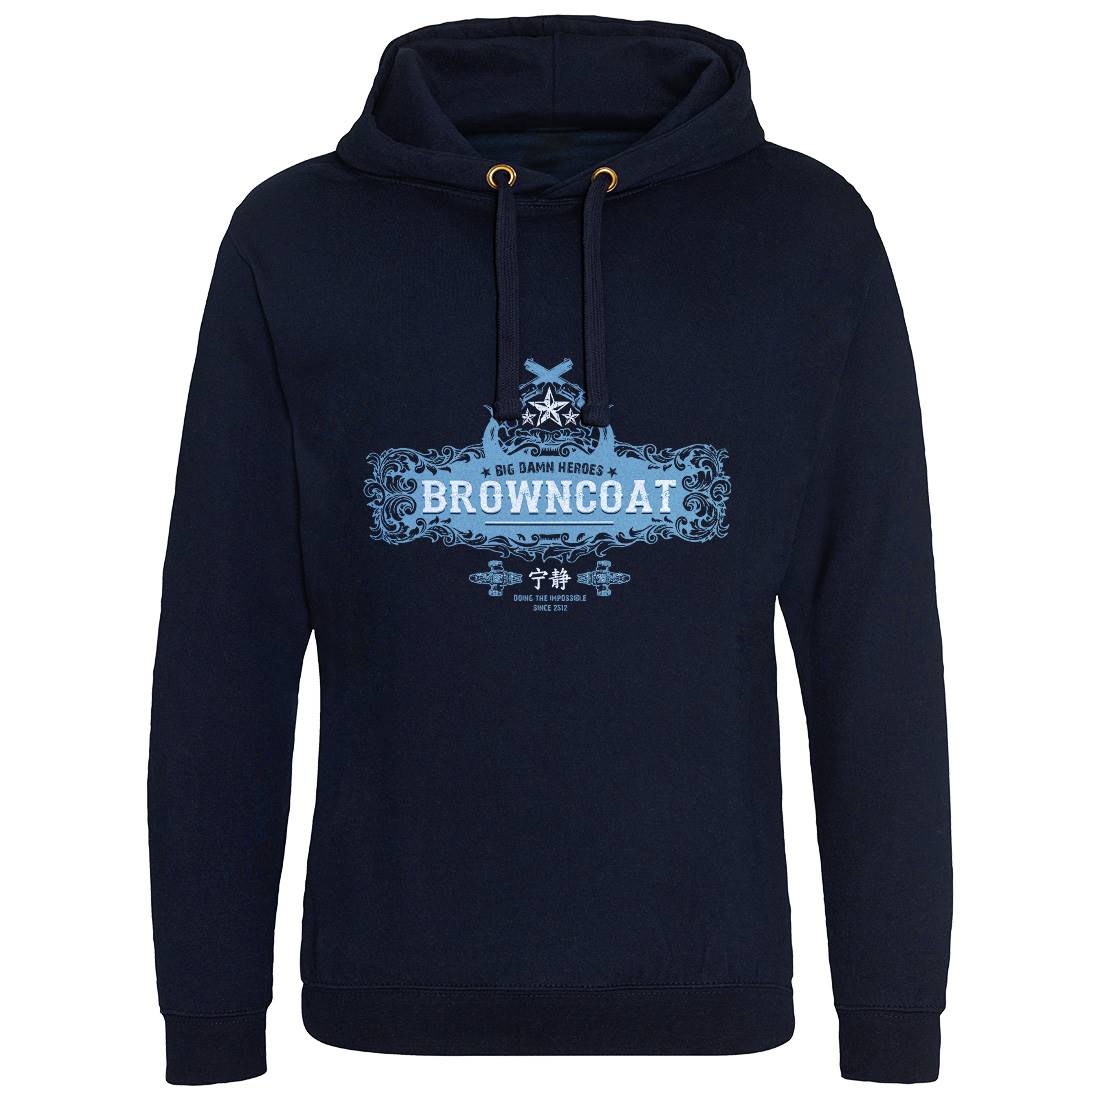 Browncoat Mens Hoodie Without Pocket Space D350